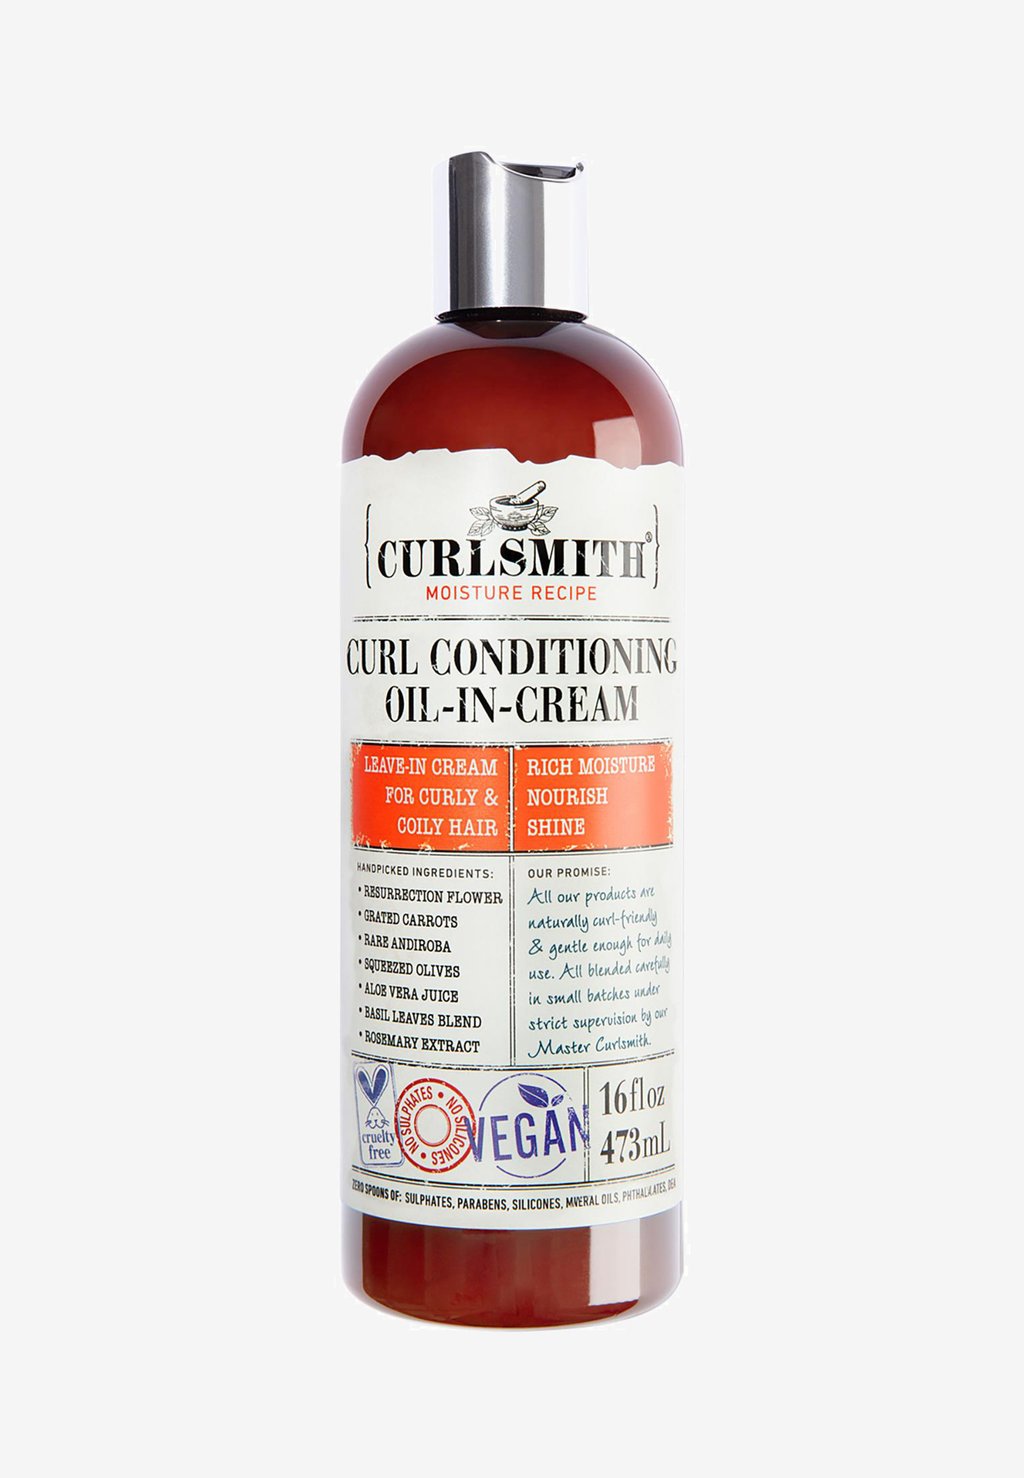 Уход за волосами Curl Conditioning Oil-In-Cream Xl Curlsmith уход за волосами bonding oil curlsmith